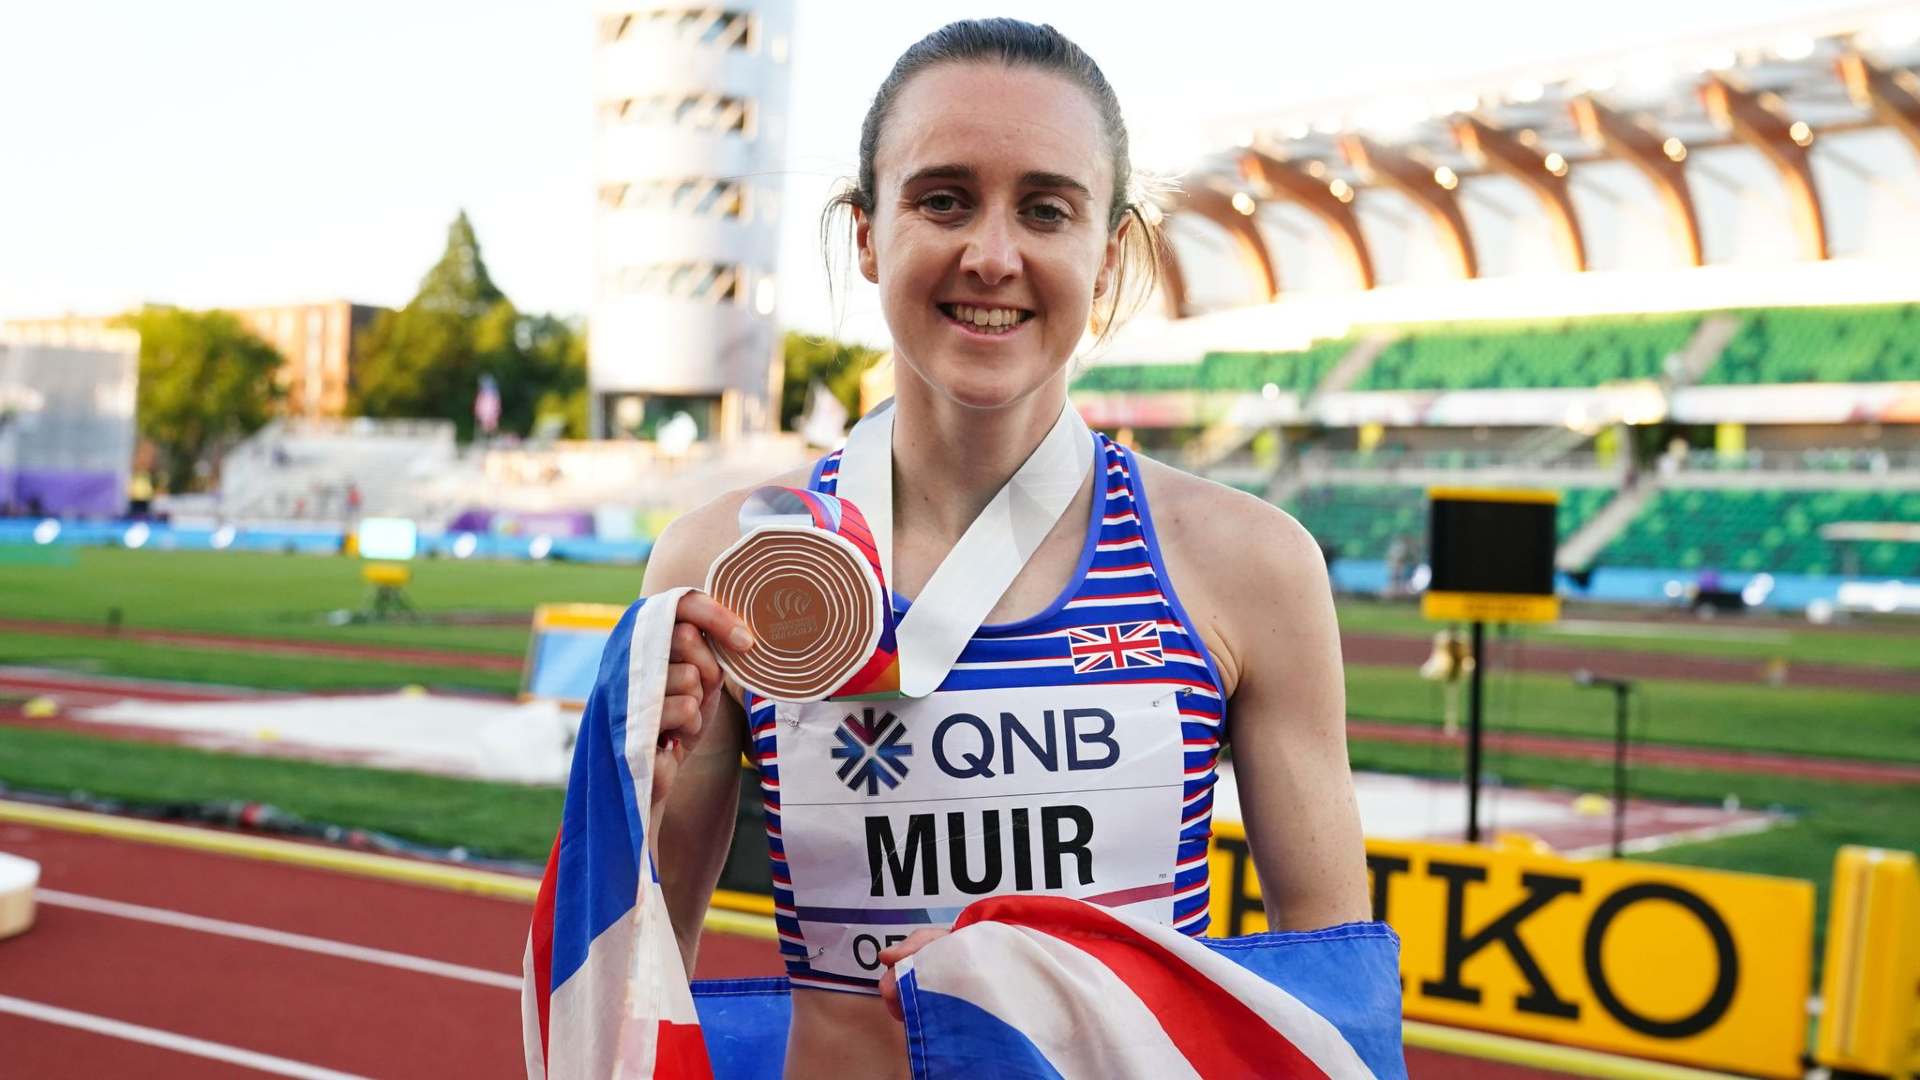 Laura Muir after winning the bronze medal at Oregon 2022 (Muir in a file photo; Image Credits - Twitter)